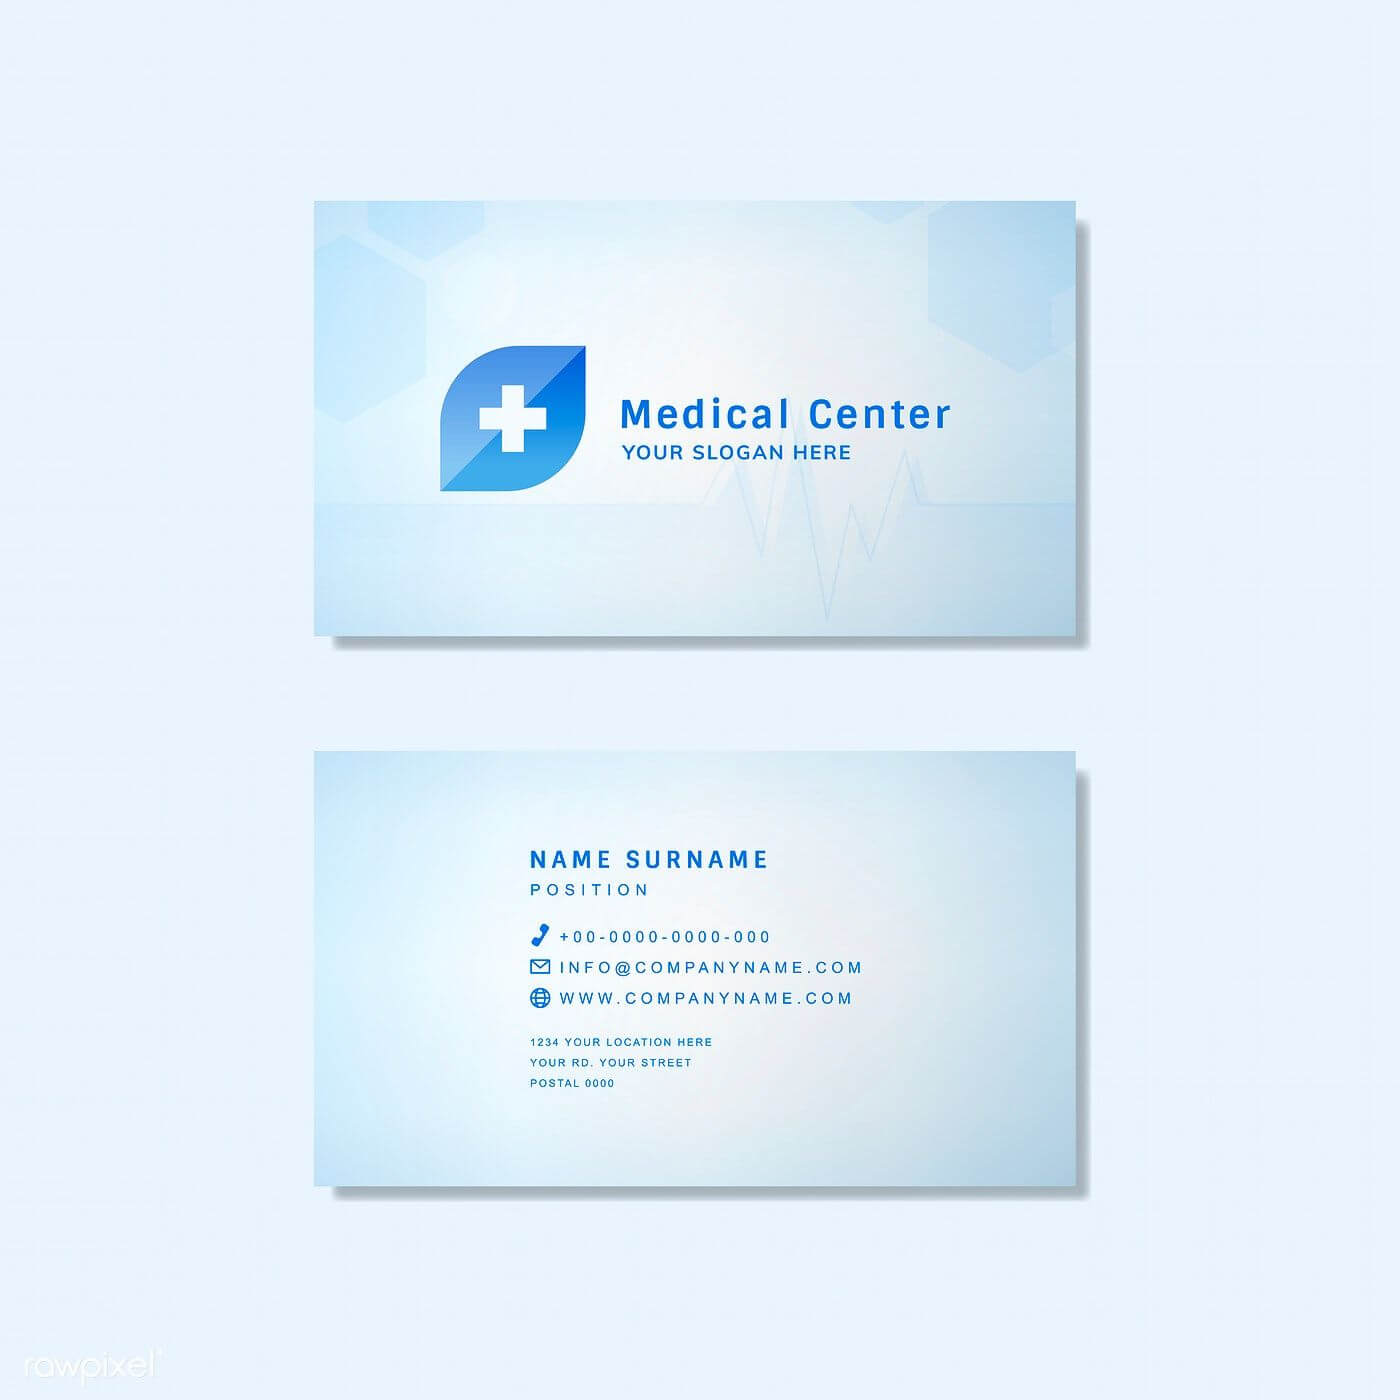 Medical Professional Business Card Design Mockup | Free Intended For Medical Business Cards Templates Free